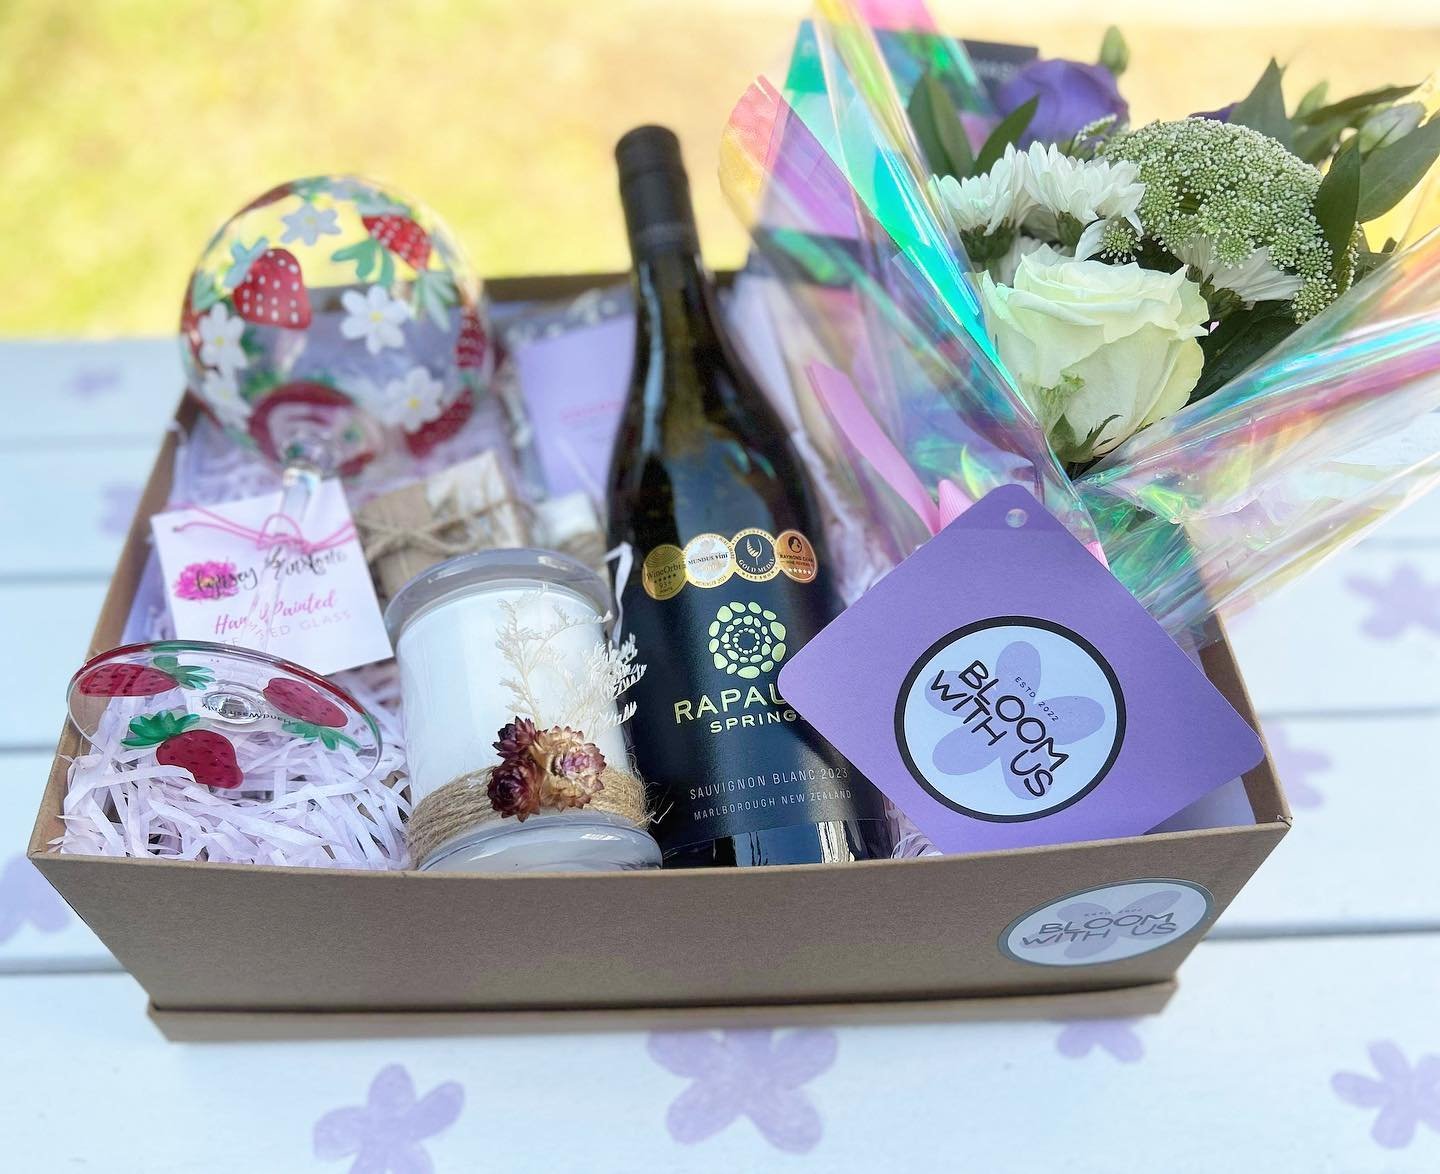 Mother&rsquo;s Day is coming up! What about the beautiful &lsquo;Hamper for Her&rsquo; available for orders online 

https://www.bloomwithus.com.au/shop/p/hamper-for-her